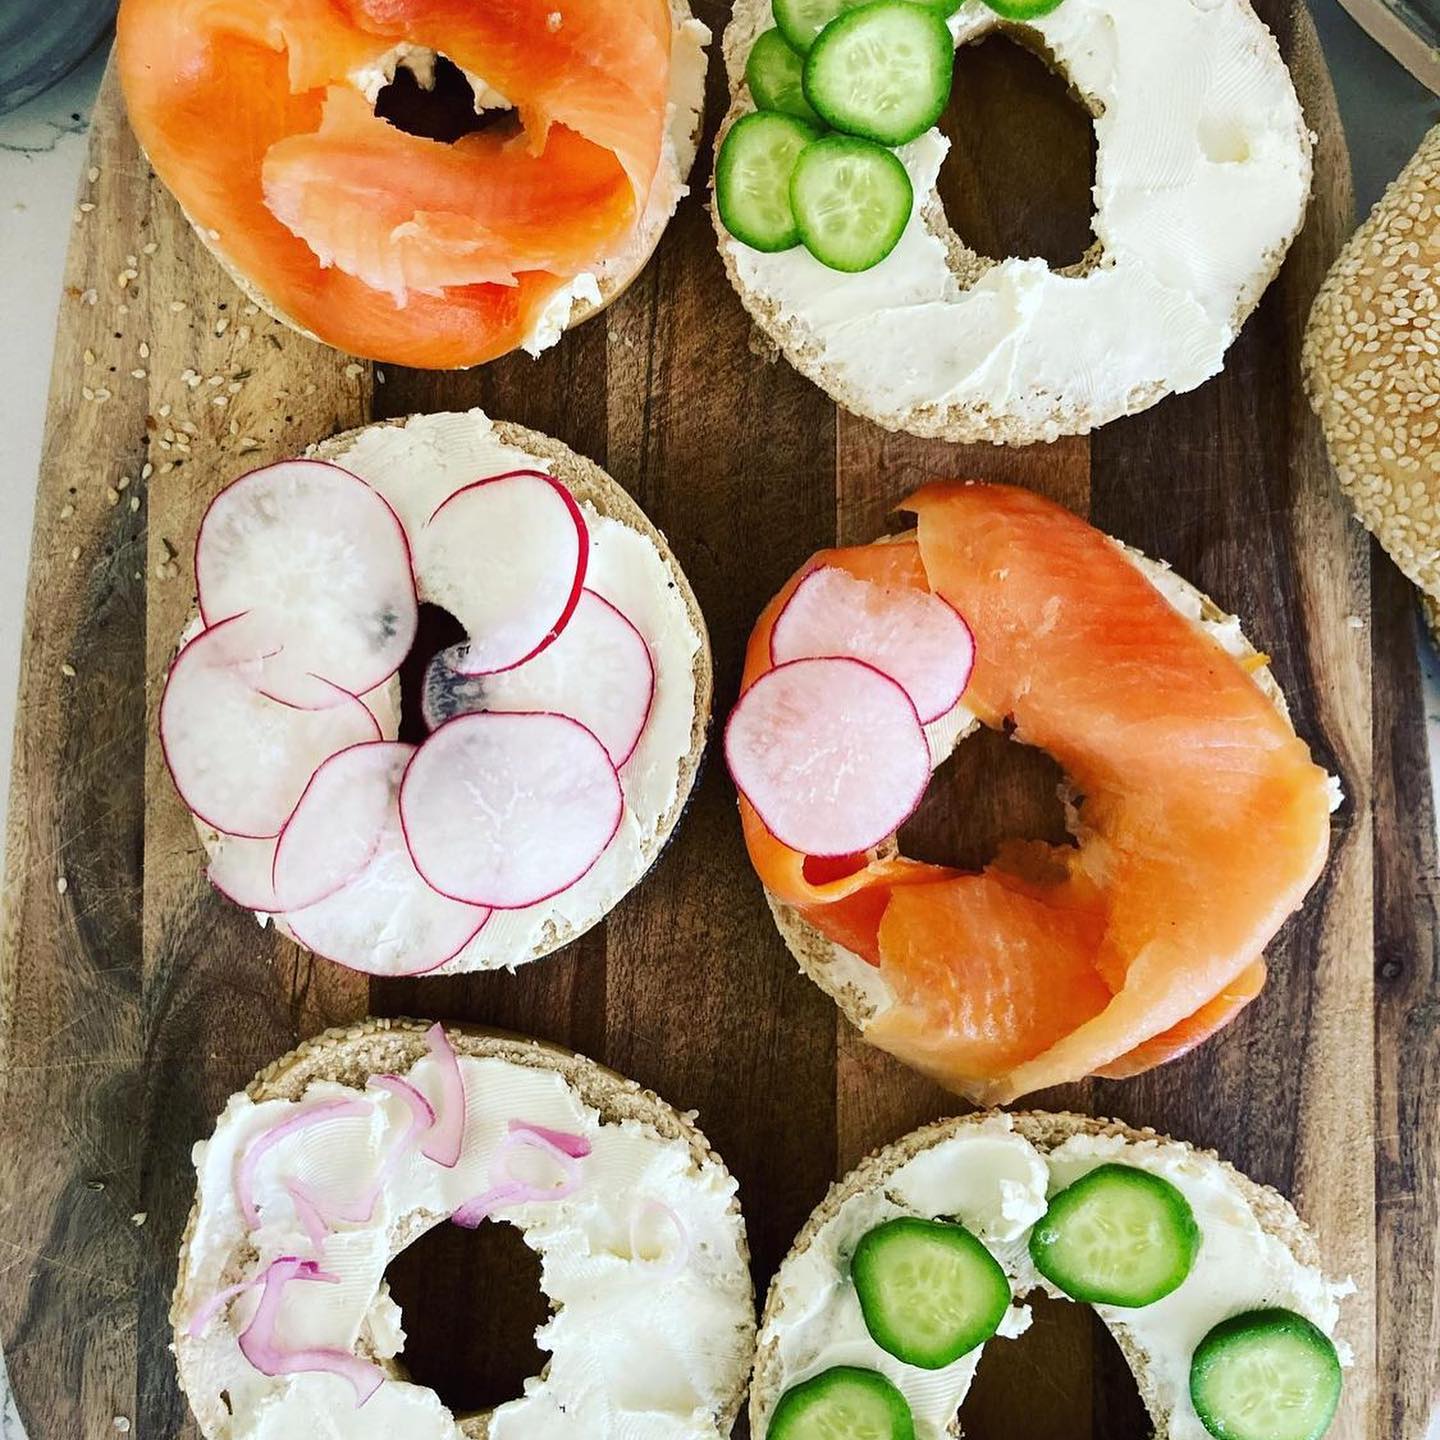 A Bird's bagel is the perfect weekend morning pick-me-up. Photo: Delta Central.